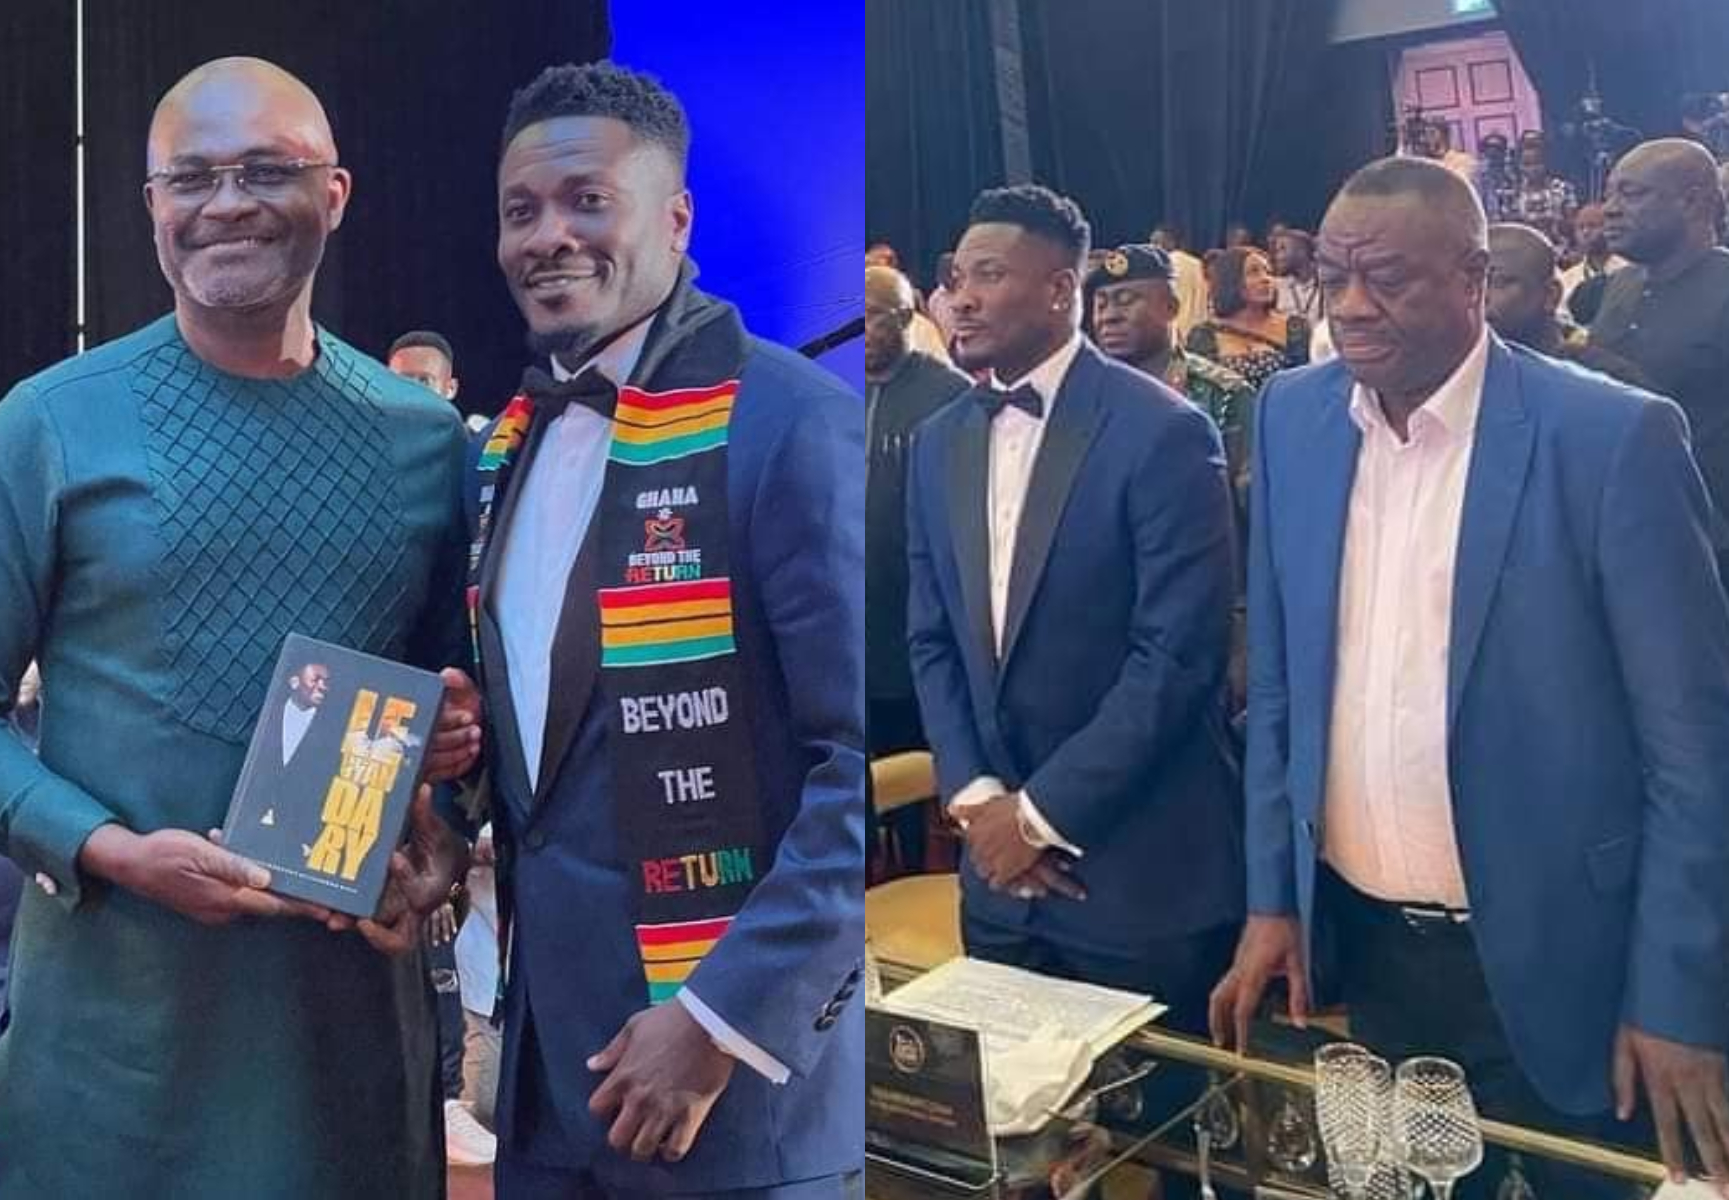 Kennedy Agyapong, Dr. Ofori Sarpong buy first copies of Gyan’s book for GHc100,000